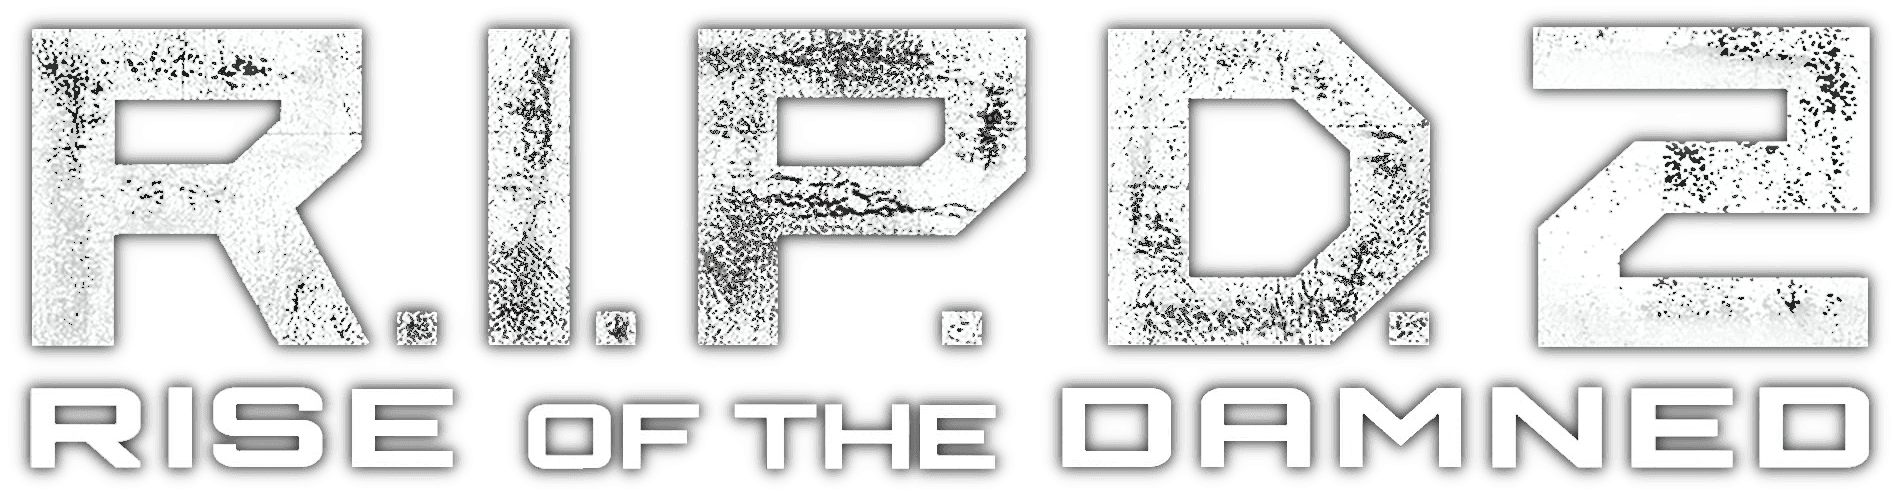 R.I.P.D. 2: Rise of the Damned logo